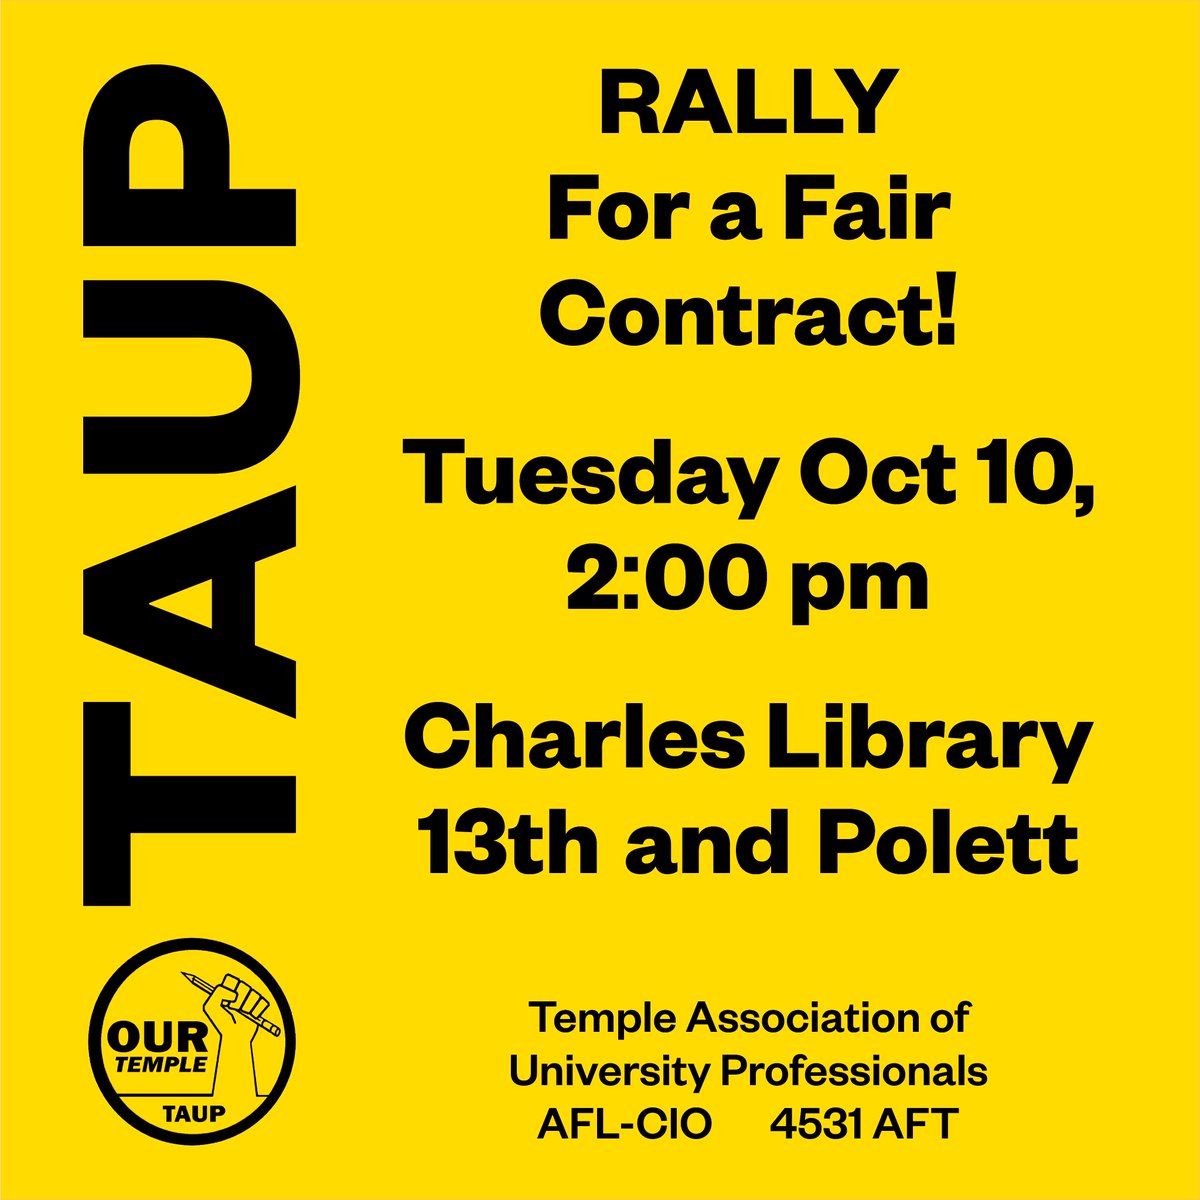 Our union siblings @taup - the union for faculty, librarians, and academic professionals - deserve a fair contract as they continue negotiations with the university. Let’s make sure Temple hears TAUP’s message loud and clear: equity, dignity & job security now! See you there!